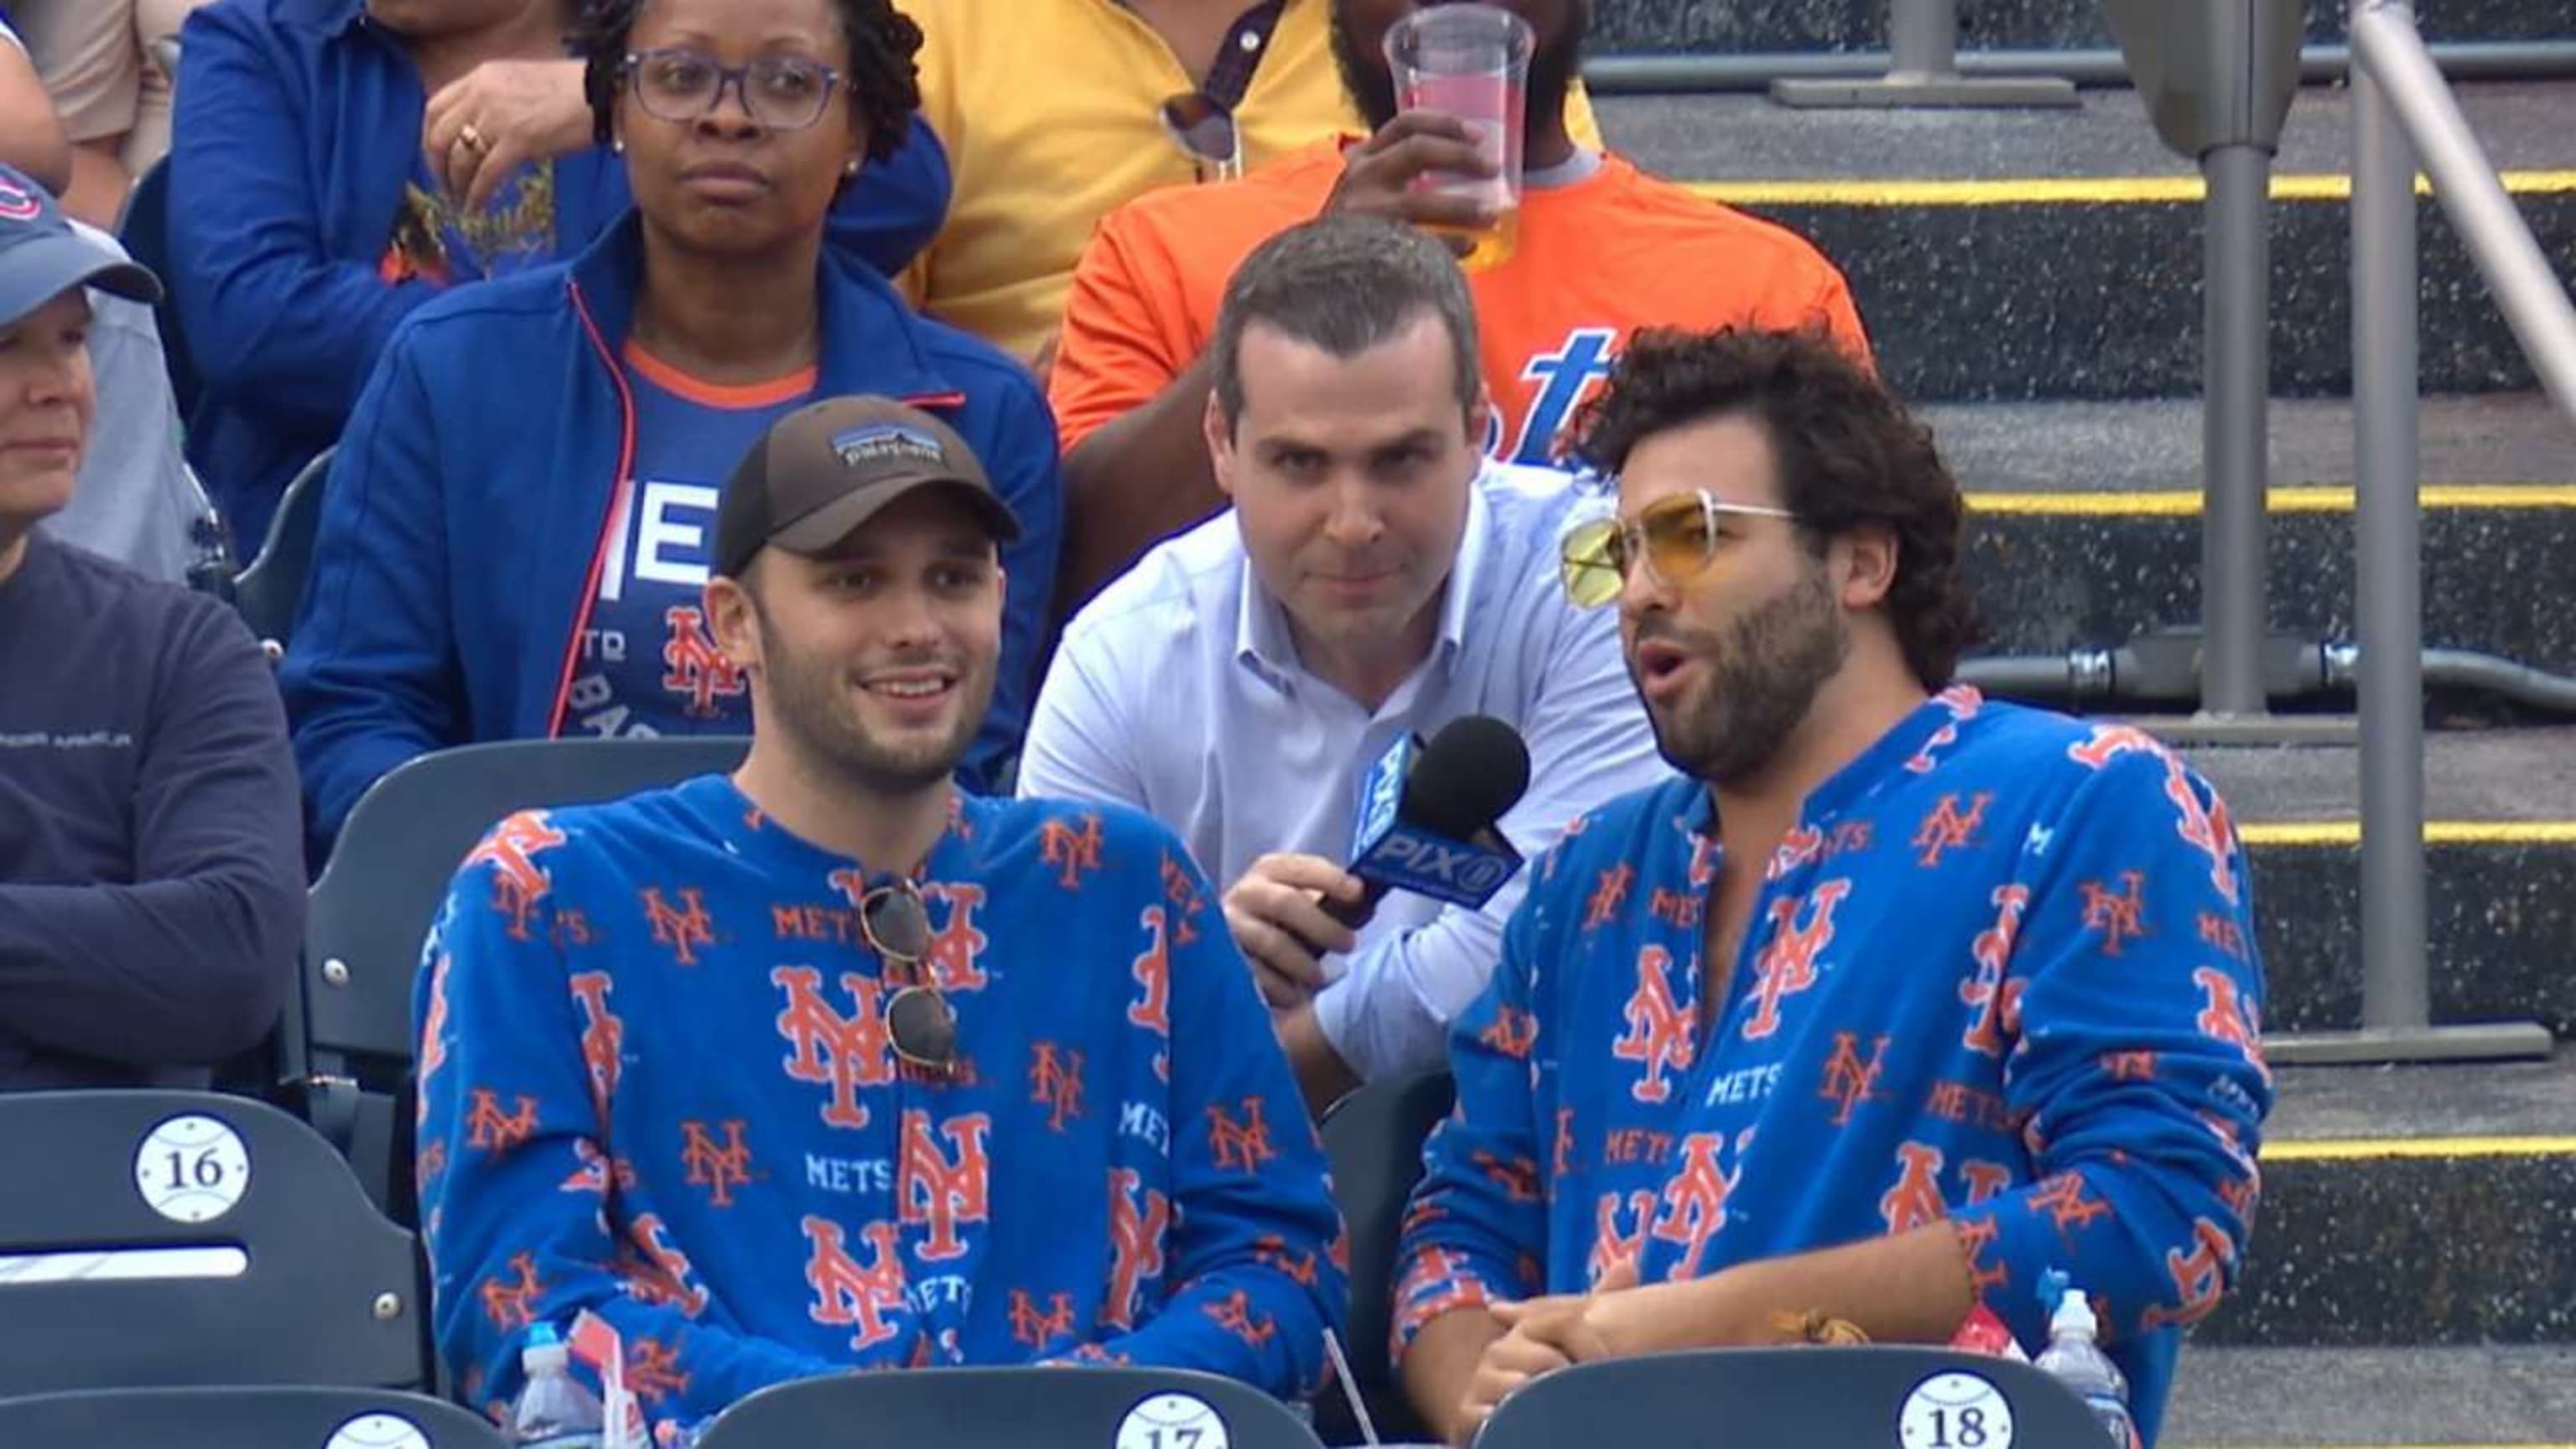 Let us introduce you to the Mets 'Onesie Bros